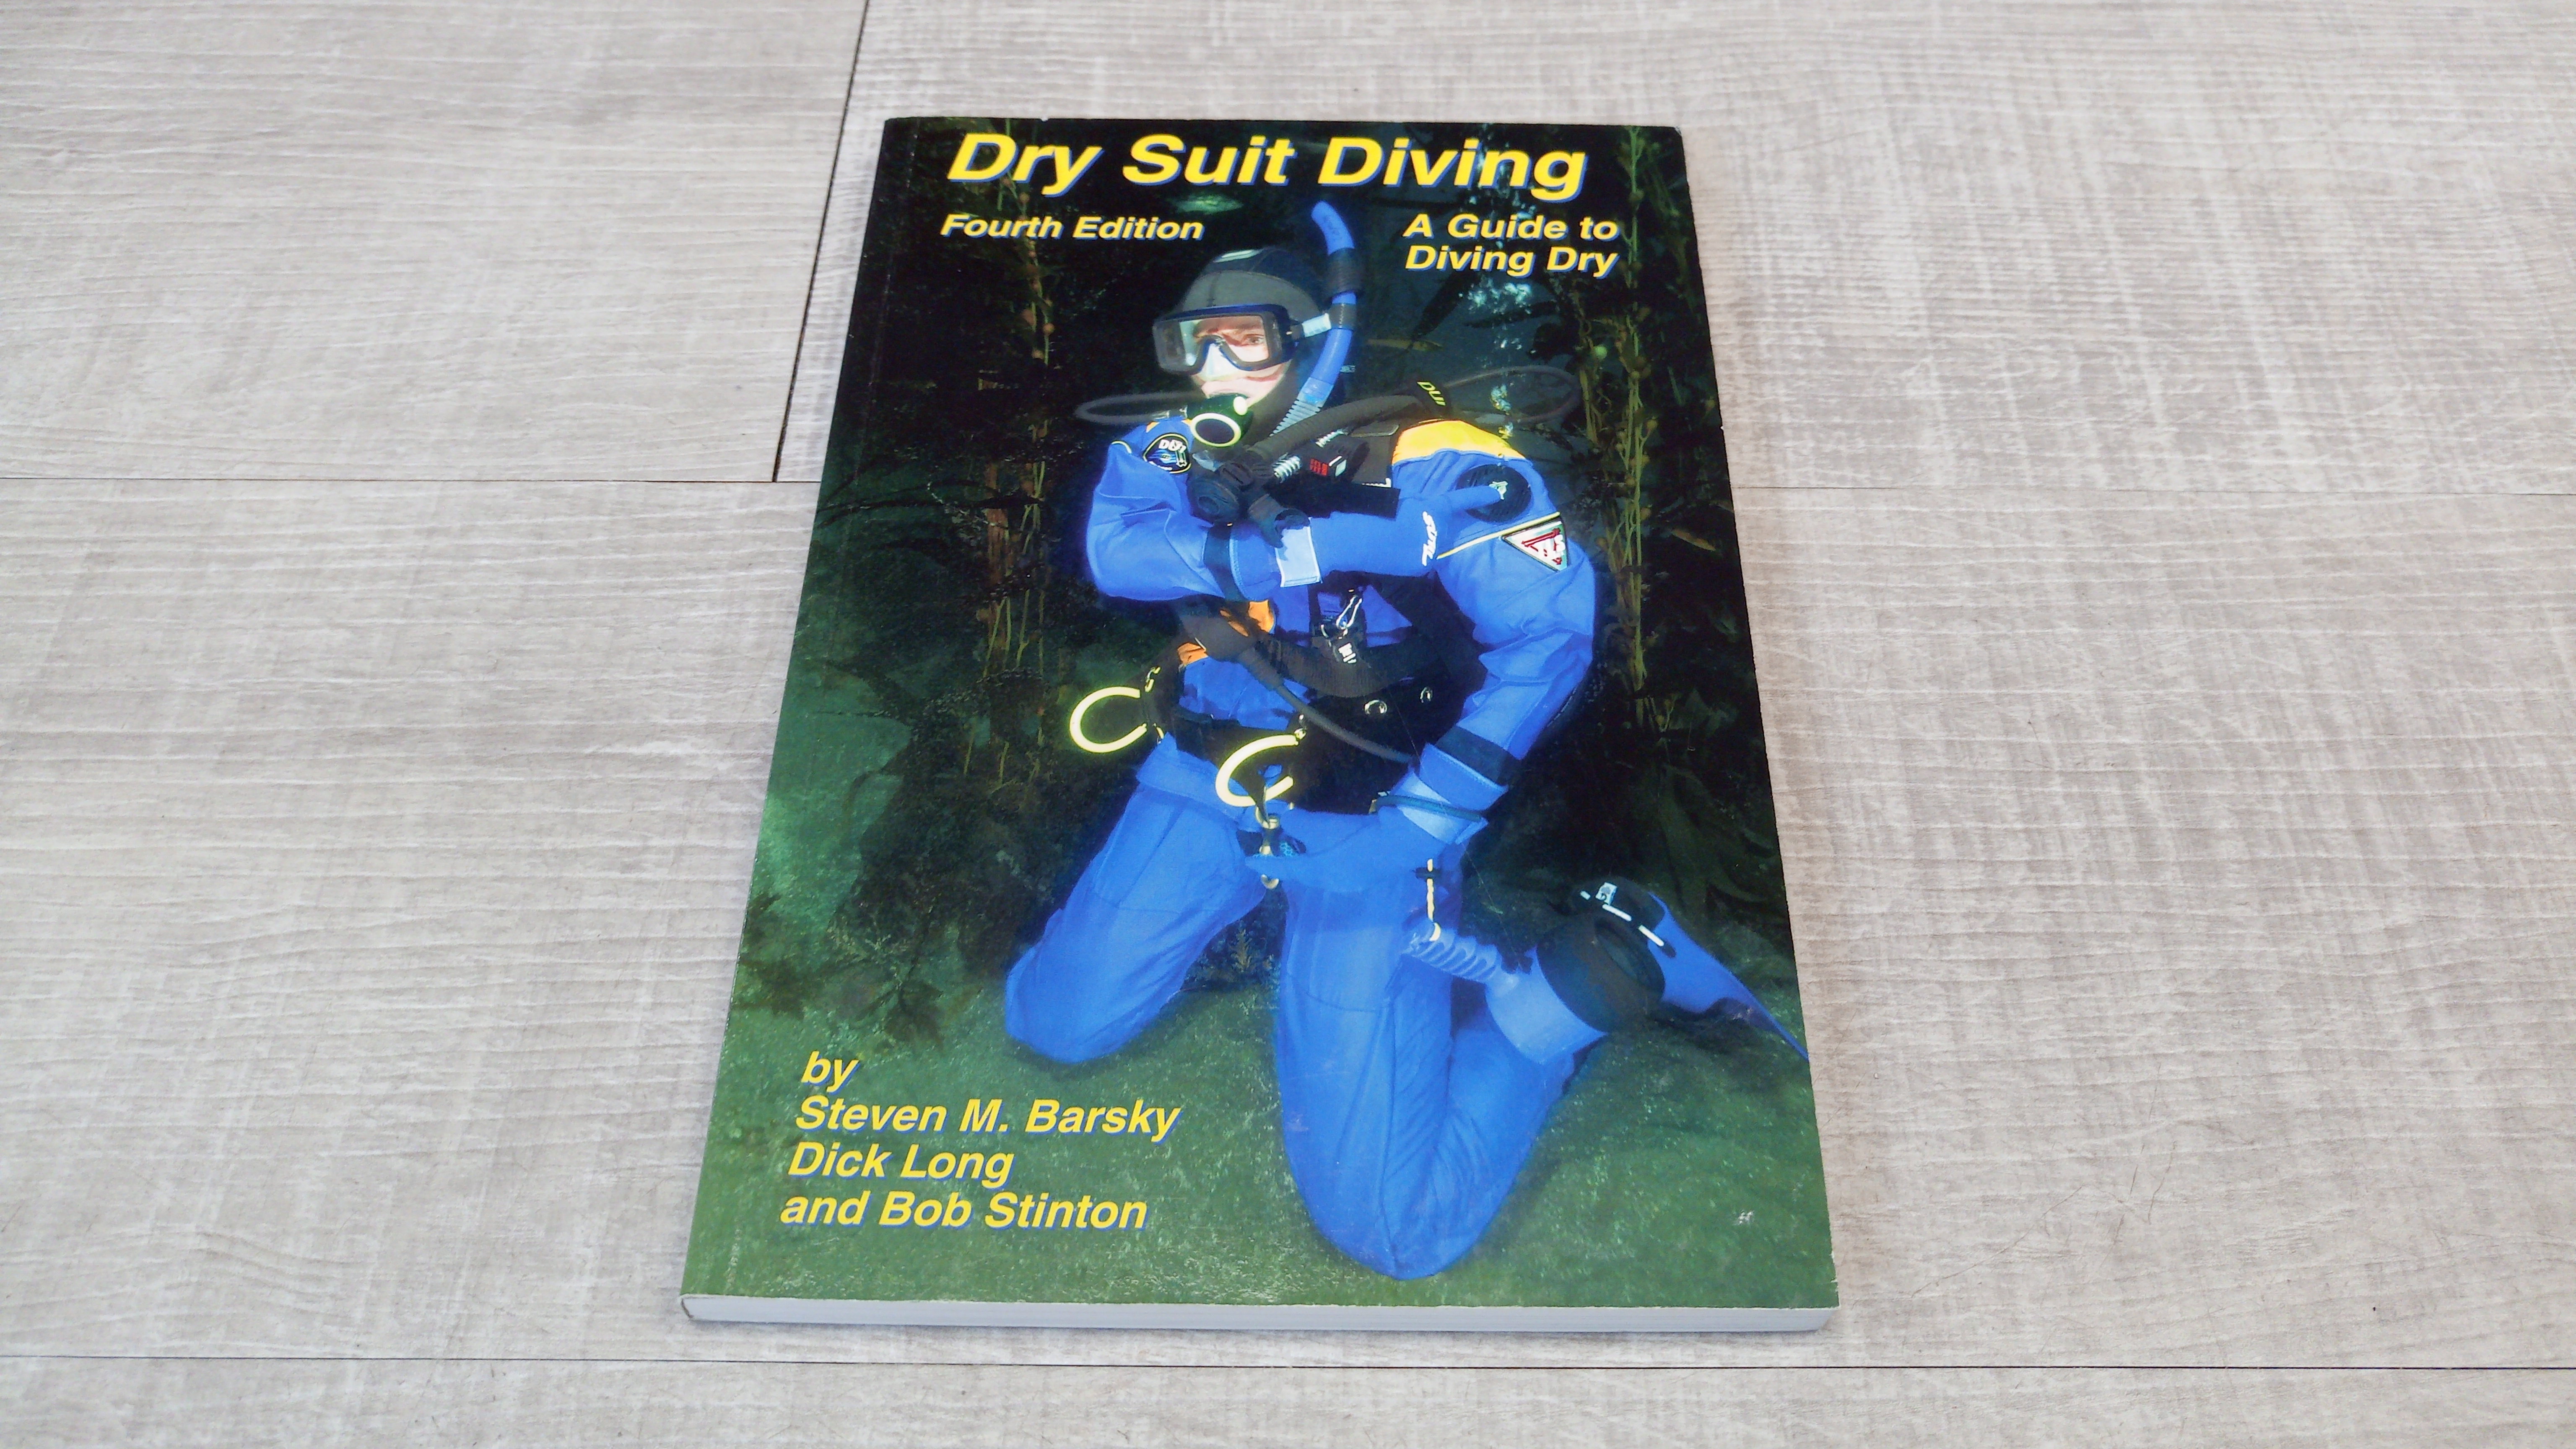 Dry Suit Diving: A Guide to Diving Dry, Fourth Edition